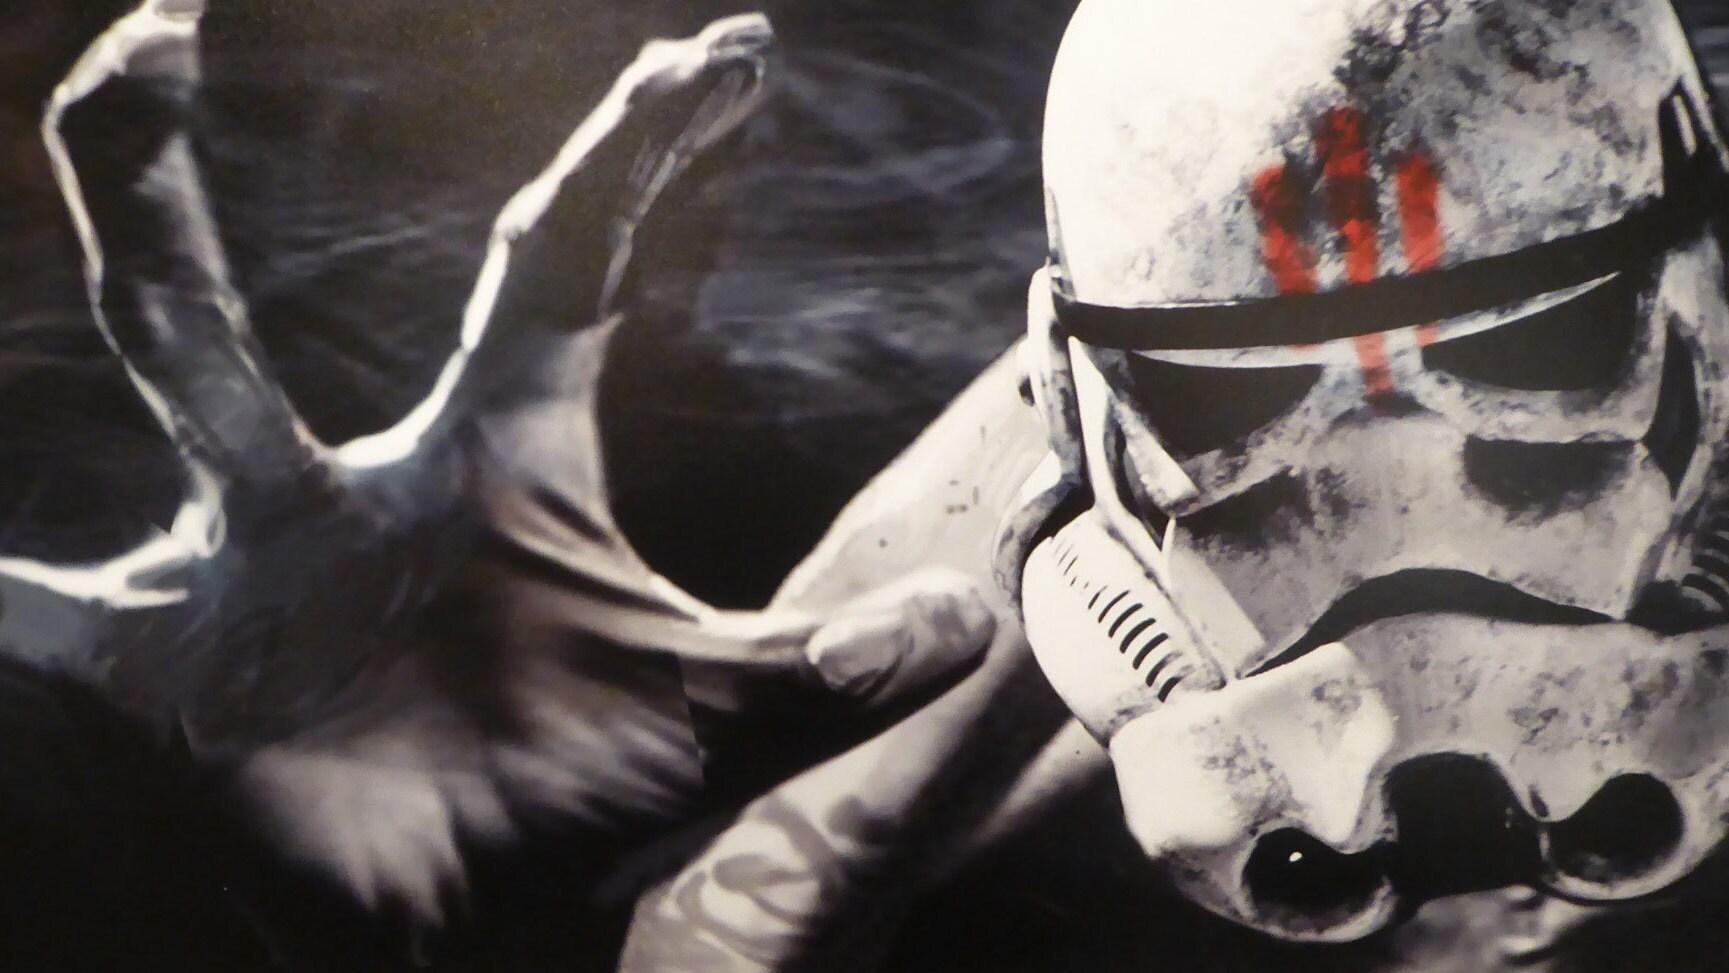 Designing The Force Awakens: James Clyne and Iain McCaig Discuss Creating Concept Art